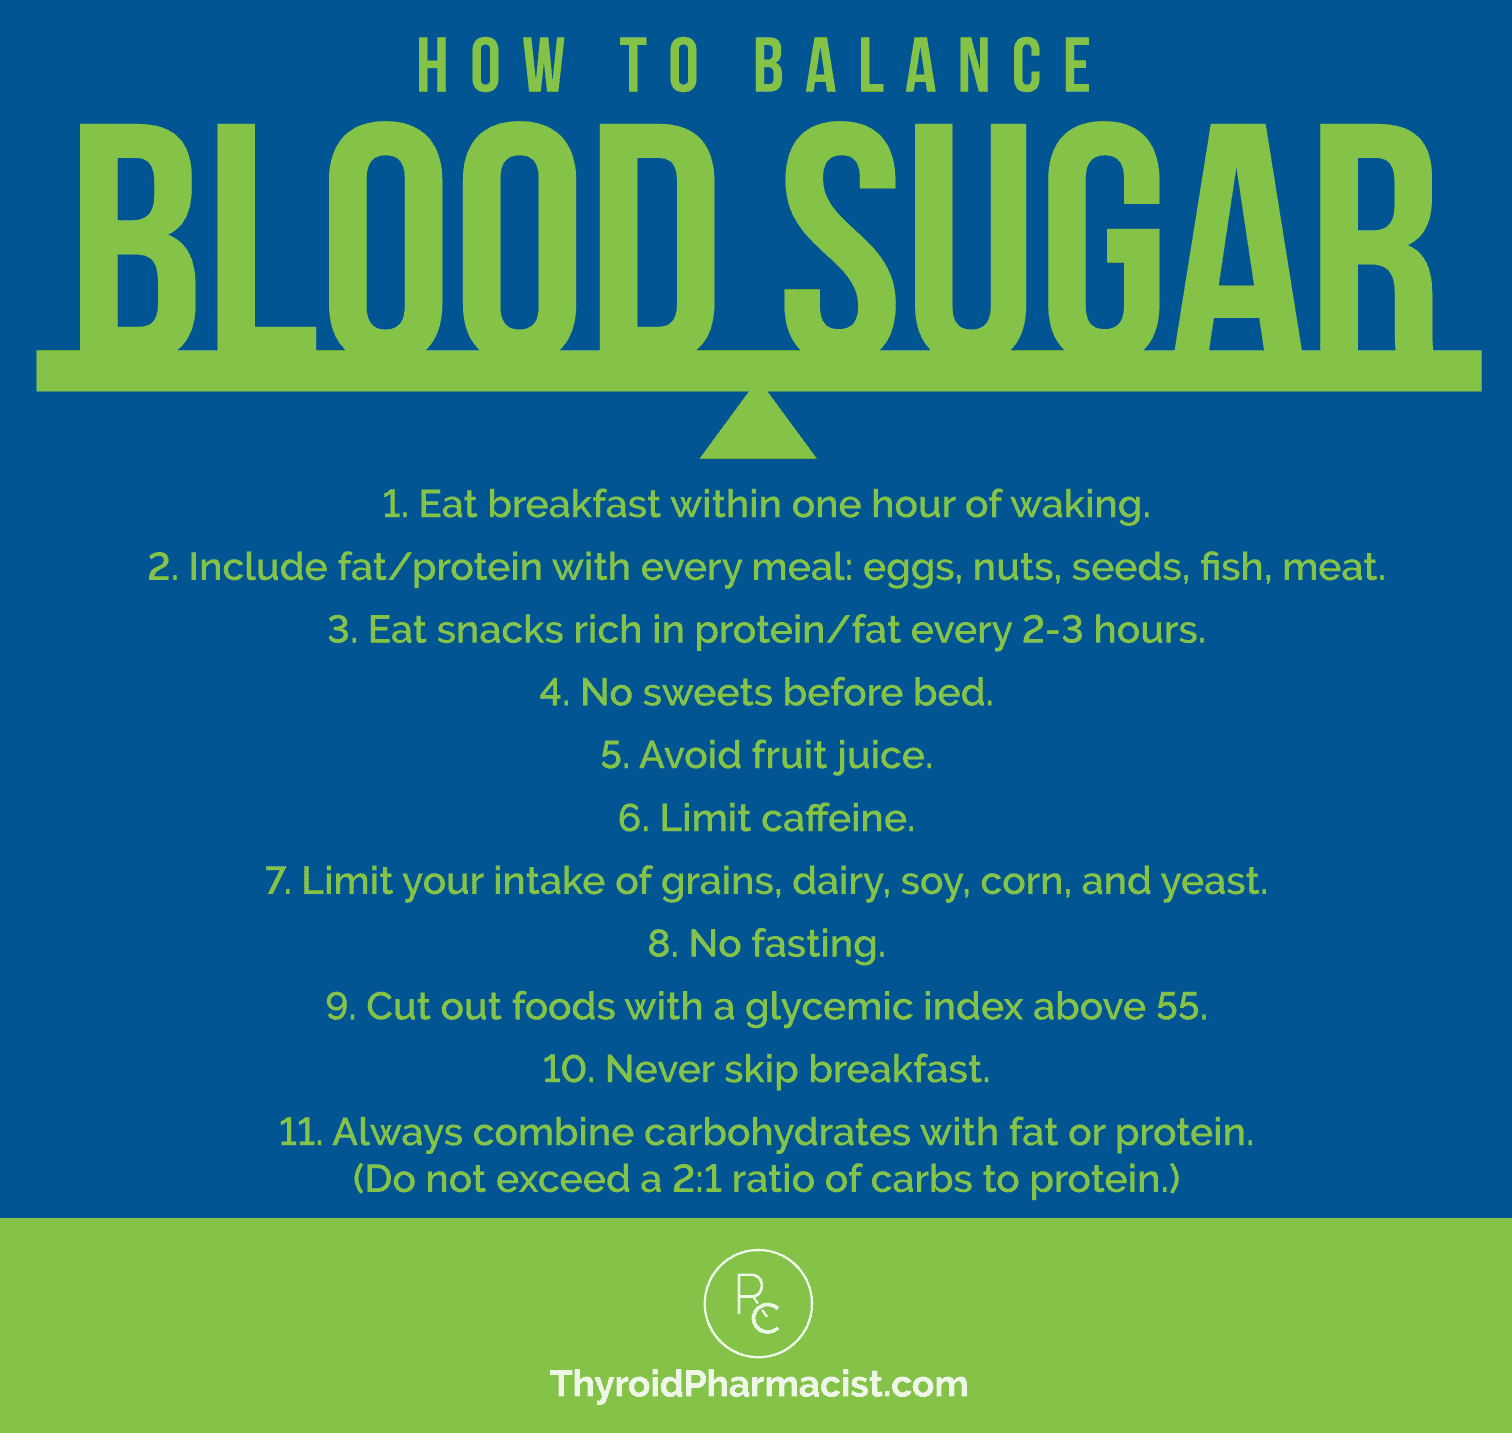 How to Balance Blood Sugar Infographic